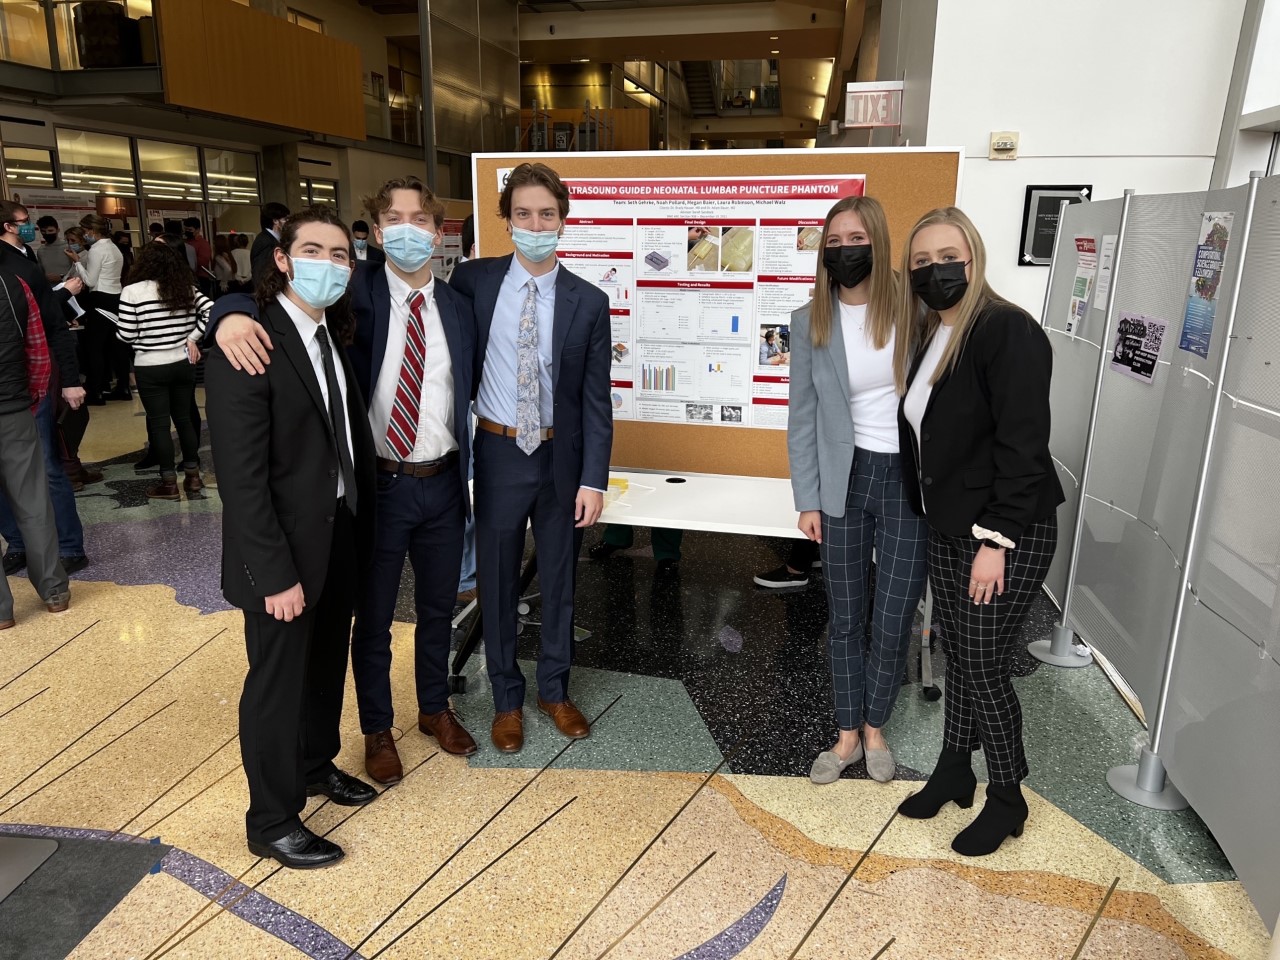 Team BGB at the final poster session. From left to right: Noah, Mike, Seth, Megan, Laura.